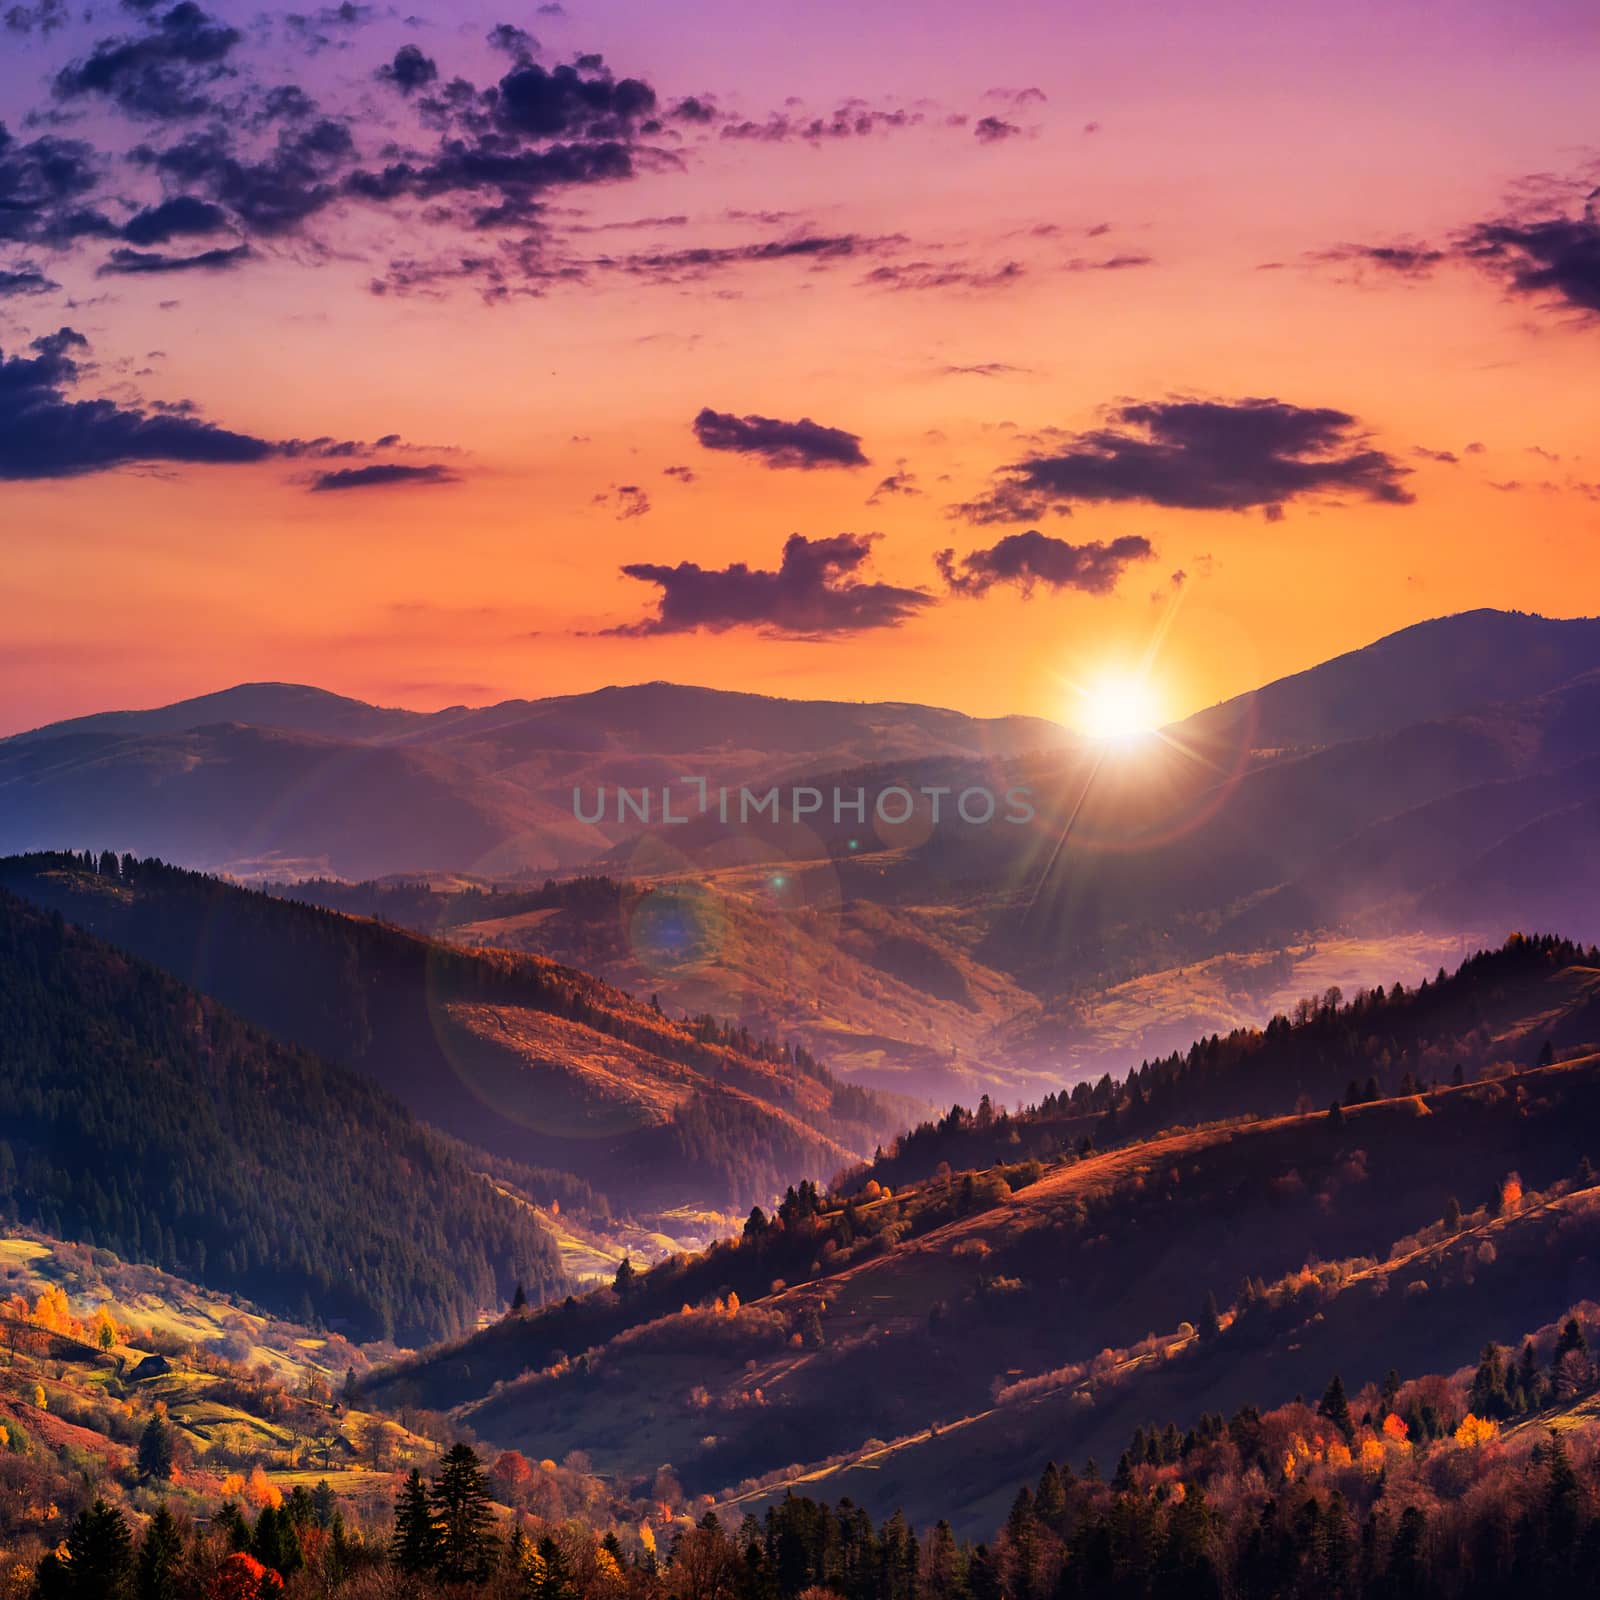 autumn landscape. forest on a hillside covered with red and yellow leaves. over the mountains against blue sky clouds in evening